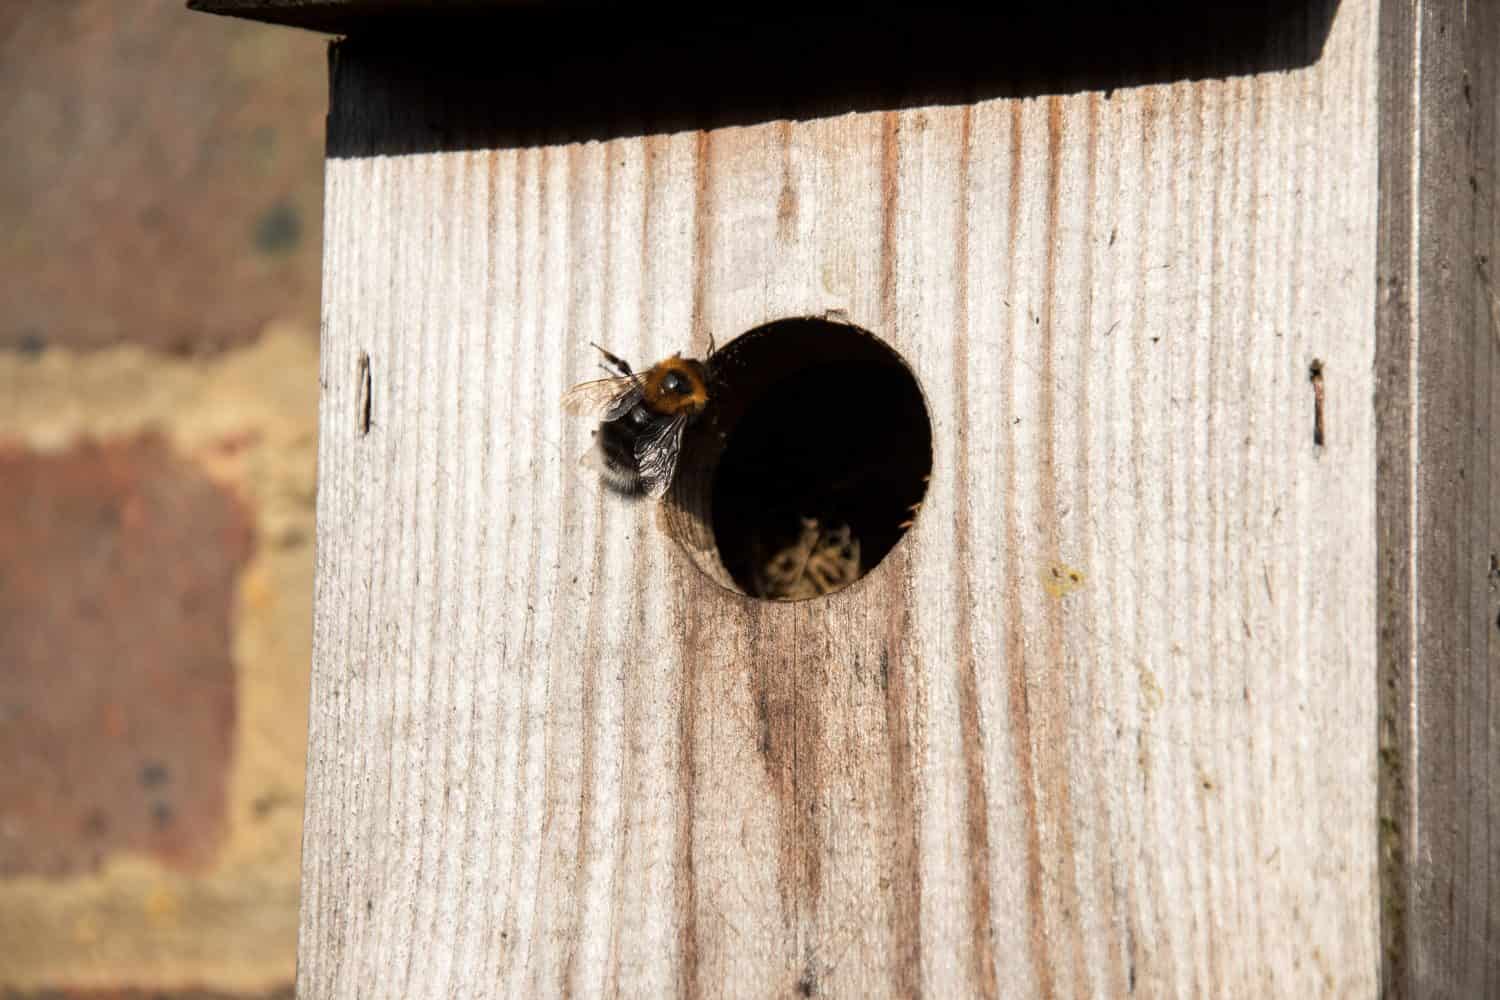 Tree Bumblebees, Bombus hypnorum, using an old bird nesting box. The box was last used by Wrens two years ago, and now the bees are making use of the original nesting material.